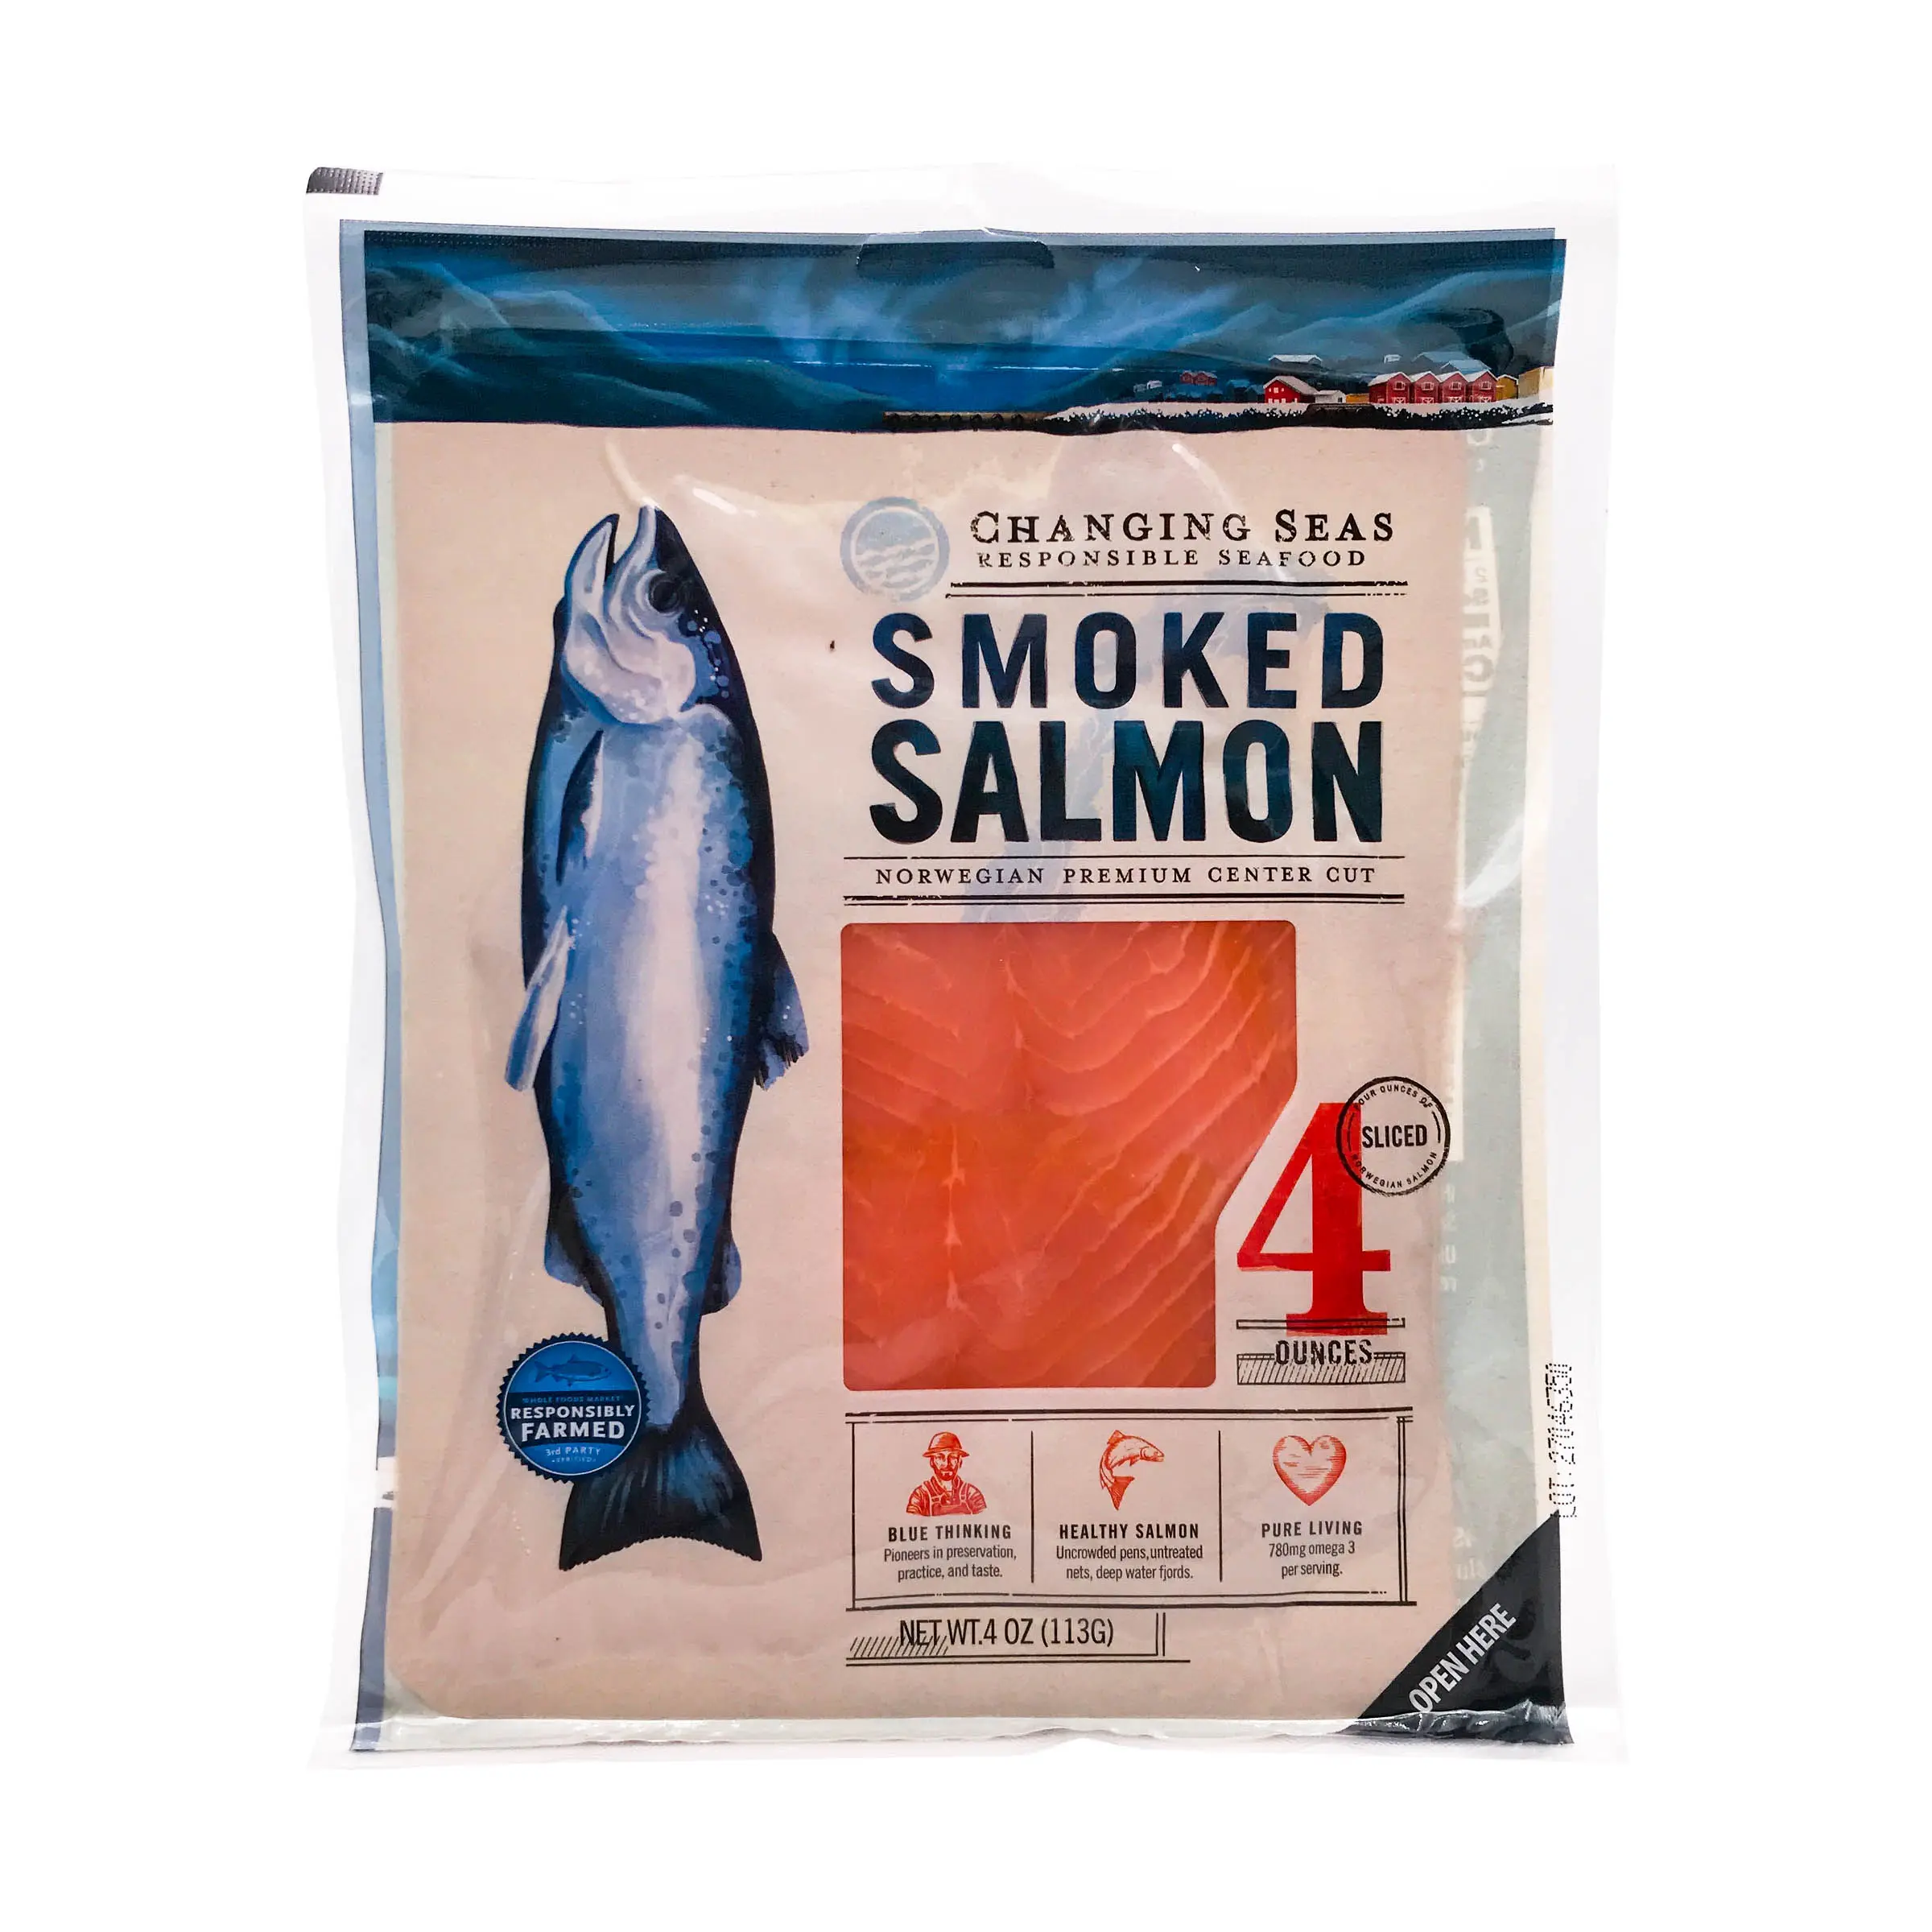 buy smoked salmon - Can you buy smoked salmon at the grocery store